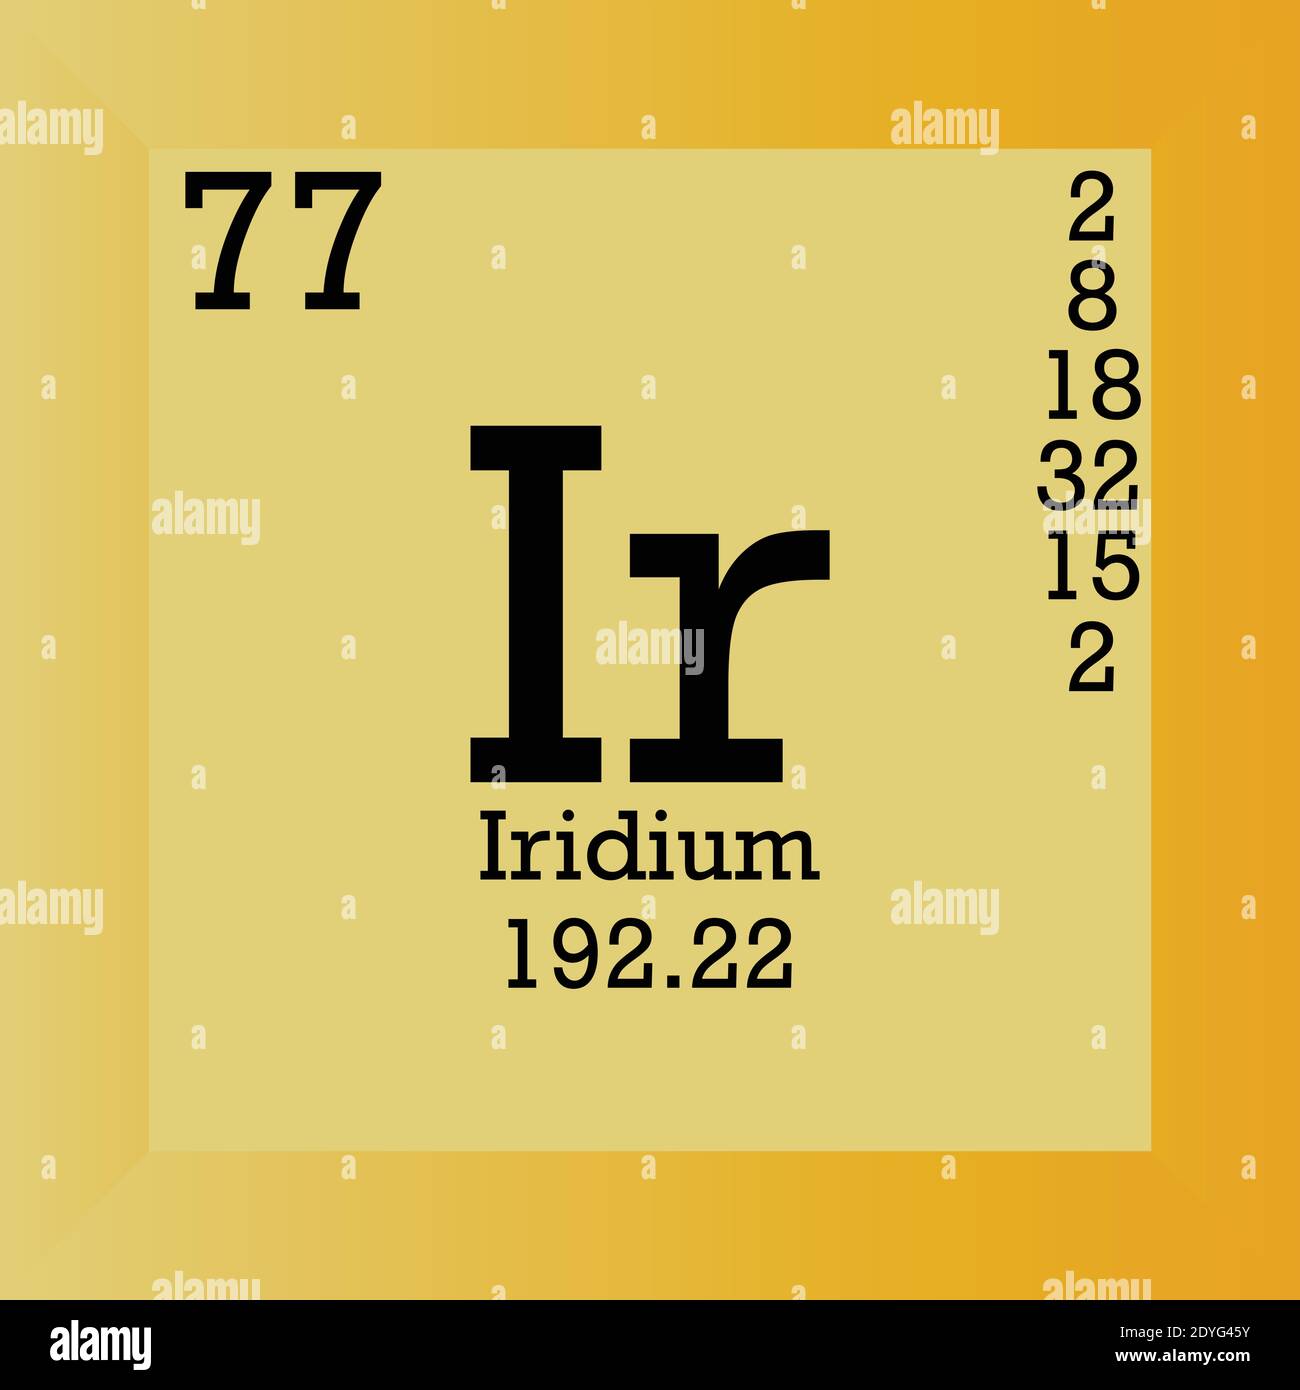 Ir Iridium Chemical Element Periodic Table. Single vector illustration, element icon with molar mass, atomic number and electron conf. Stock Vector